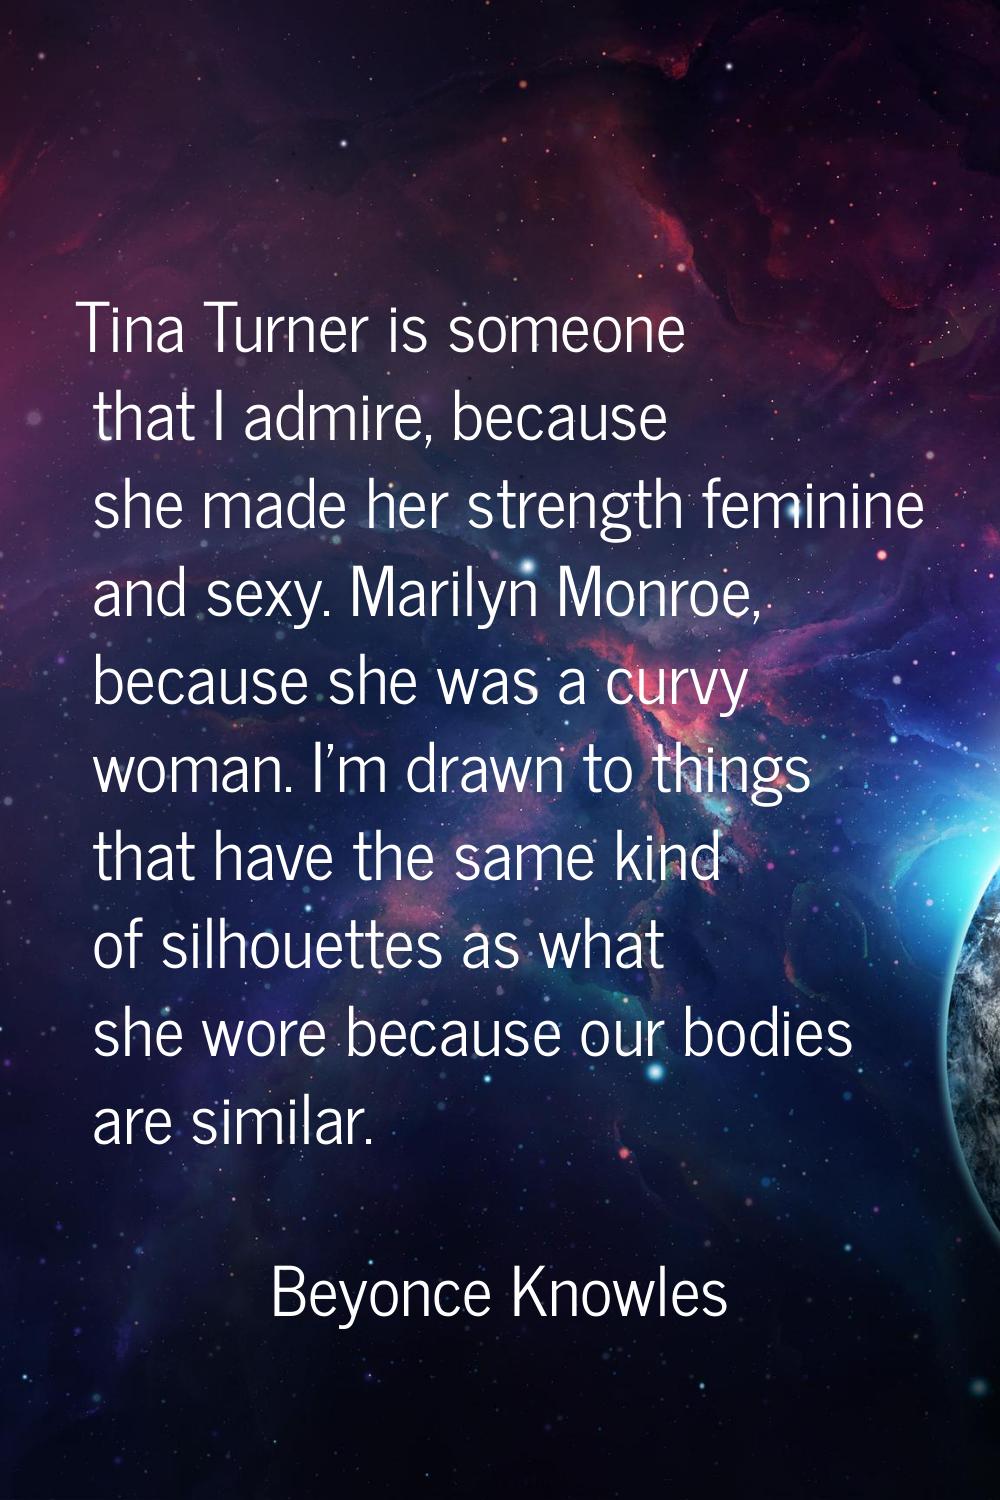 Tina Turner is someone that I admire, because she made her strength feminine and sexy. Marilyn Monr